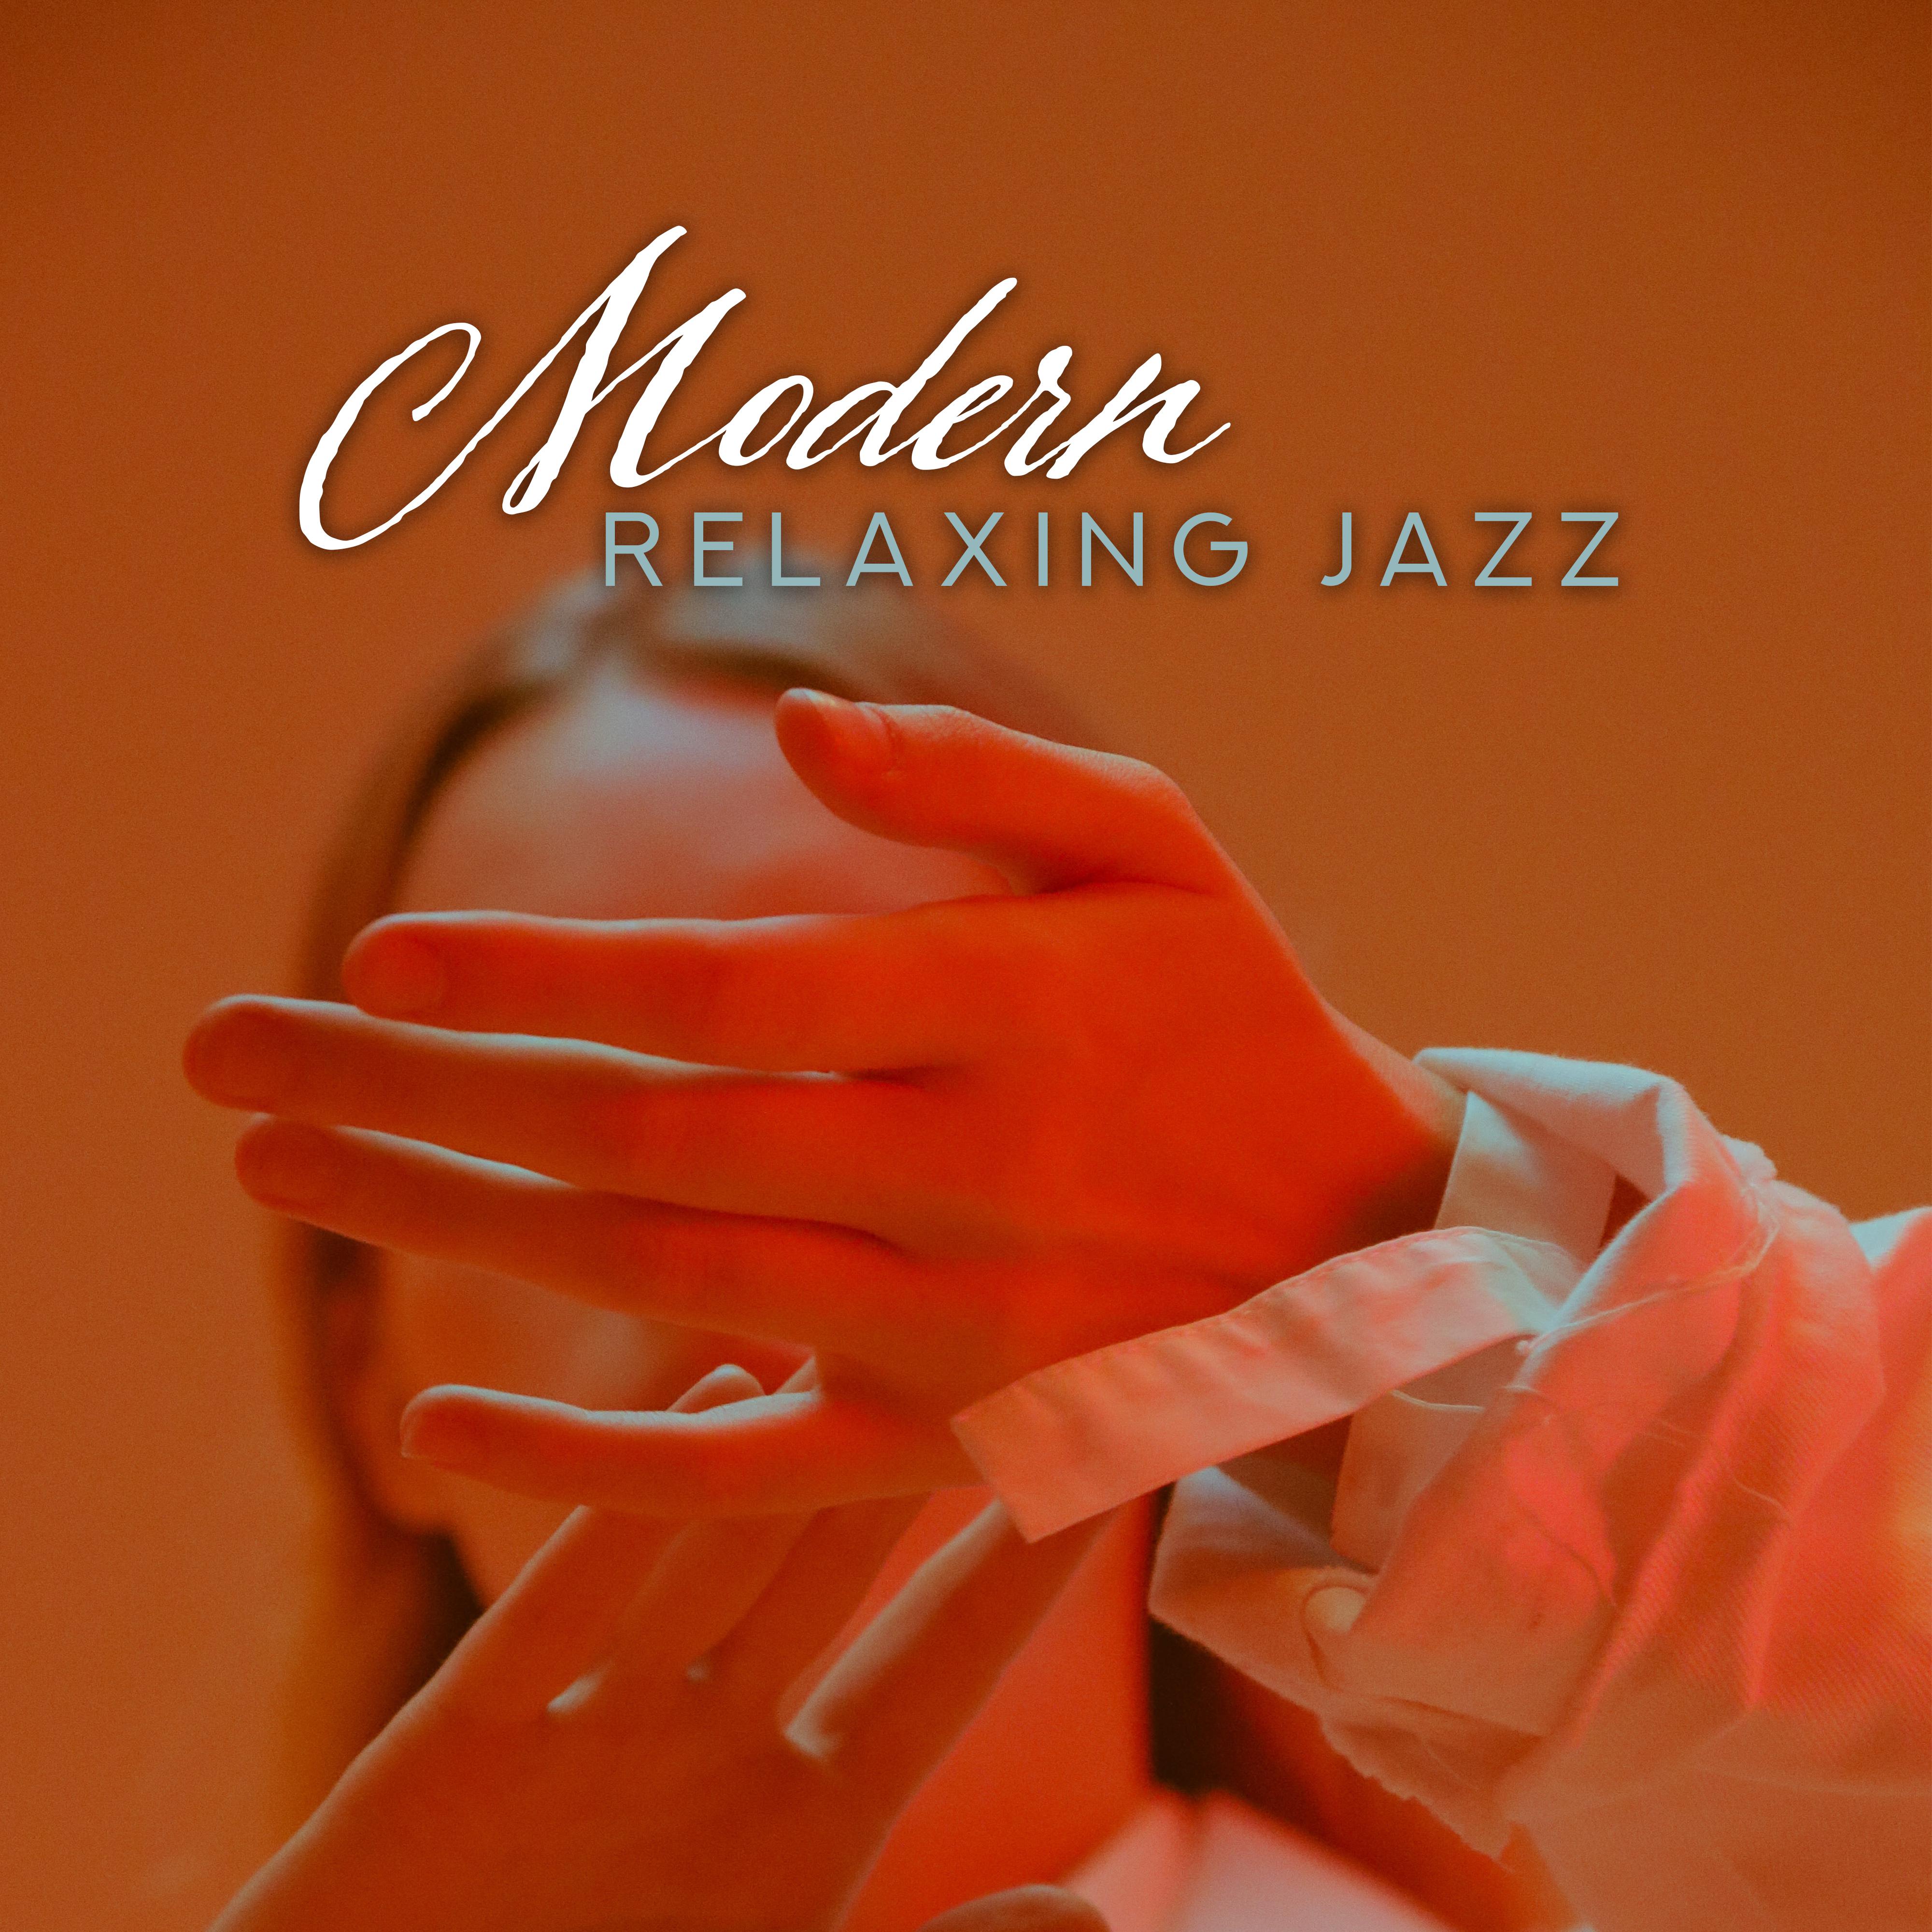 Modern Relaxing Jazz – 15 Jazz Collection for Relaxation, Gentle Jazz for Restaurant, Coffee Music, Jazz Lounge, Instrumental Jazz Music Ambient